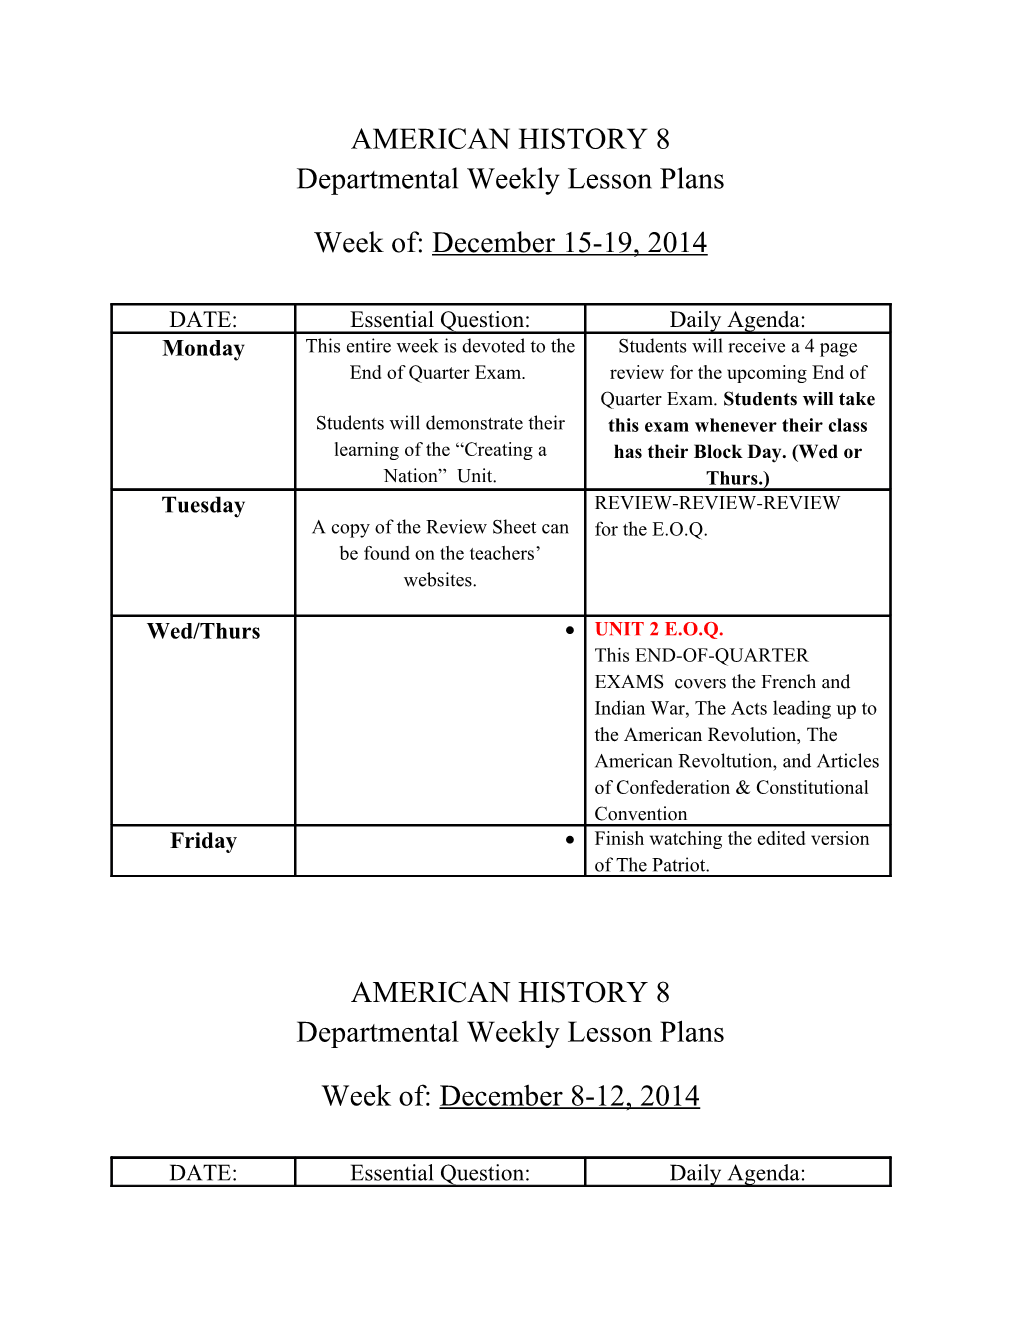 Departmental Weekly Lesson Plans